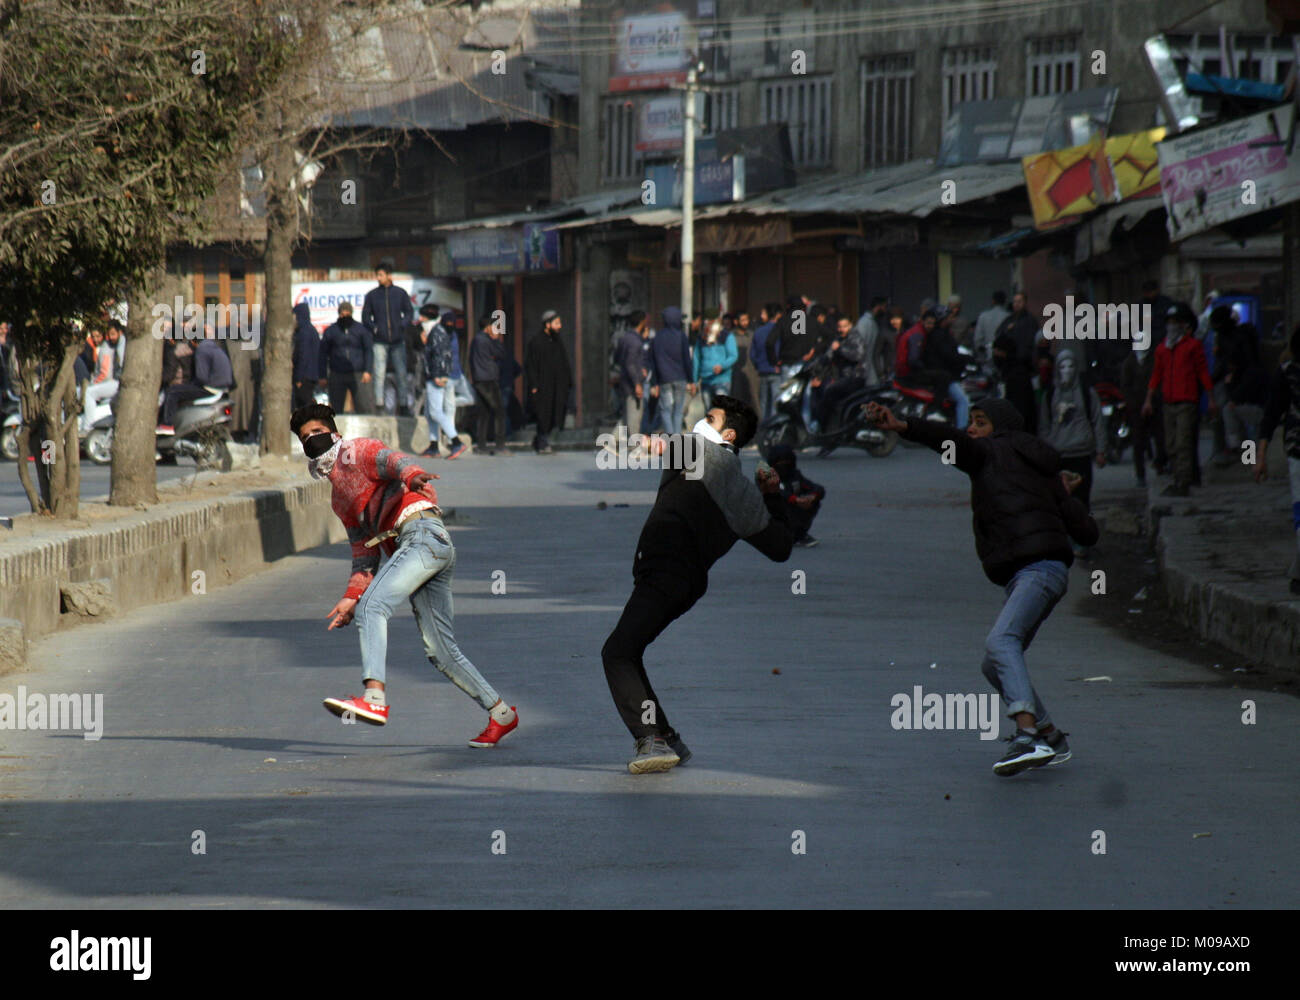 Srinagar.KASHMIR19. JANUARY masked Kashmiri protester throw stones at Indian policemen during a protest after friday prayers Indian forces used tear gas and pellet guns to disperse hundreds of stone-throwing protesters who were protesting against National Investigation Agency (NIA) chargesheet.Hafiz Lashkar-e-Taiba (LeT) Hizb-ul-Mujahideen, Syed Salahuddin and 10 accused: 7 separatists, 1 businessman, 2 stone pelters Credit: Sofi Suhail/Alamy Live News Stock Photo